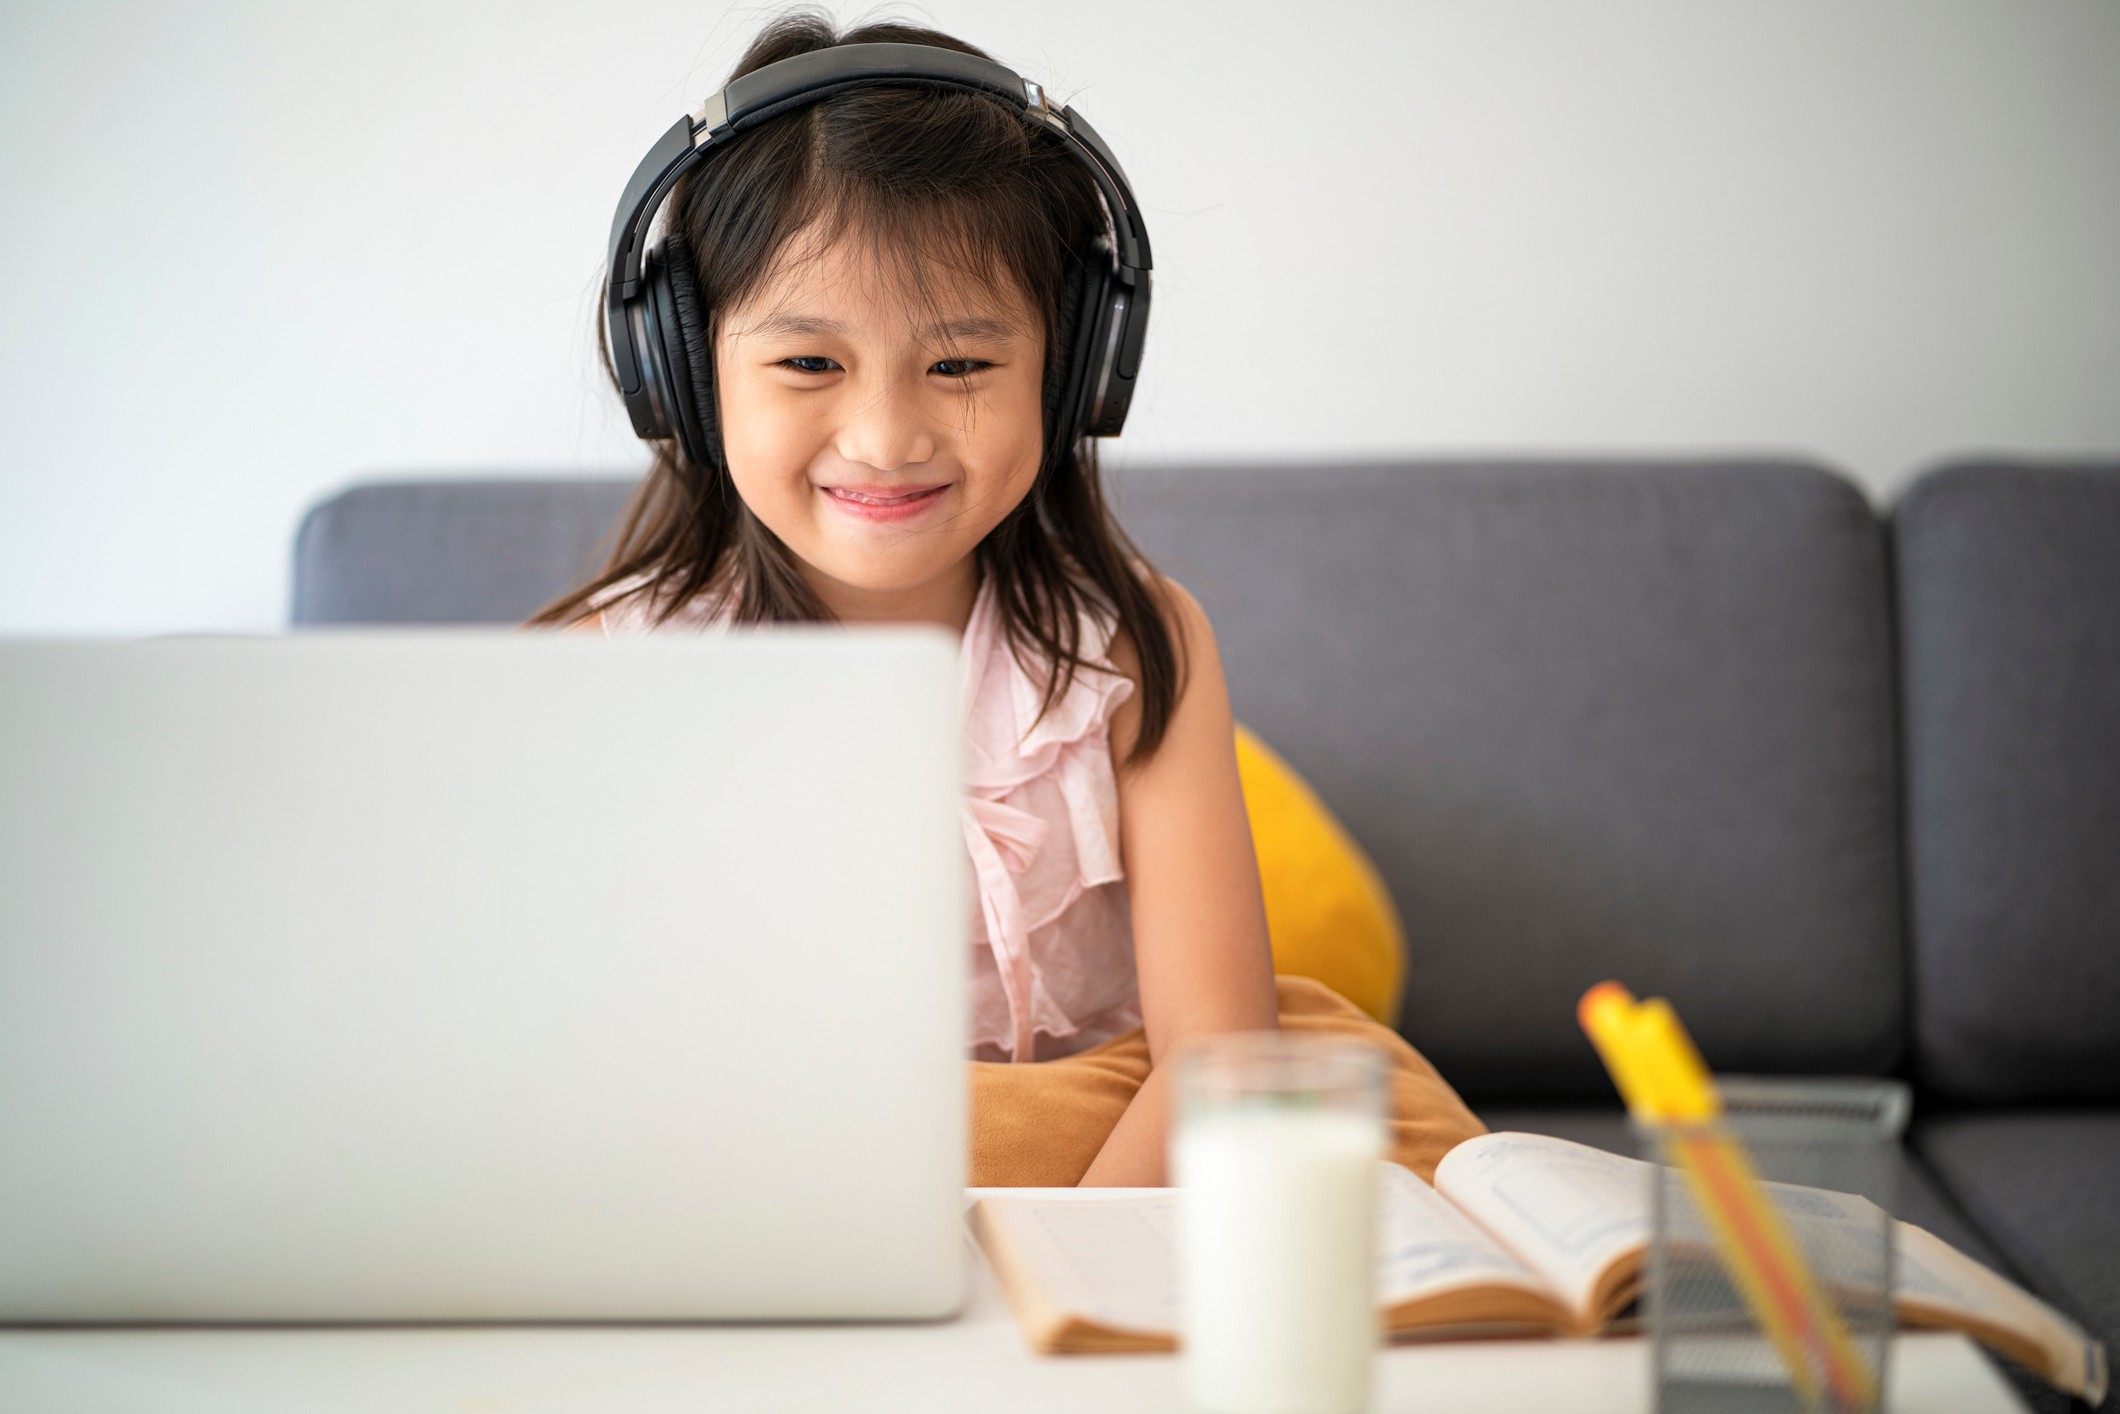 child sitting on couch with headphones on, smiling and learning on a laptop. 